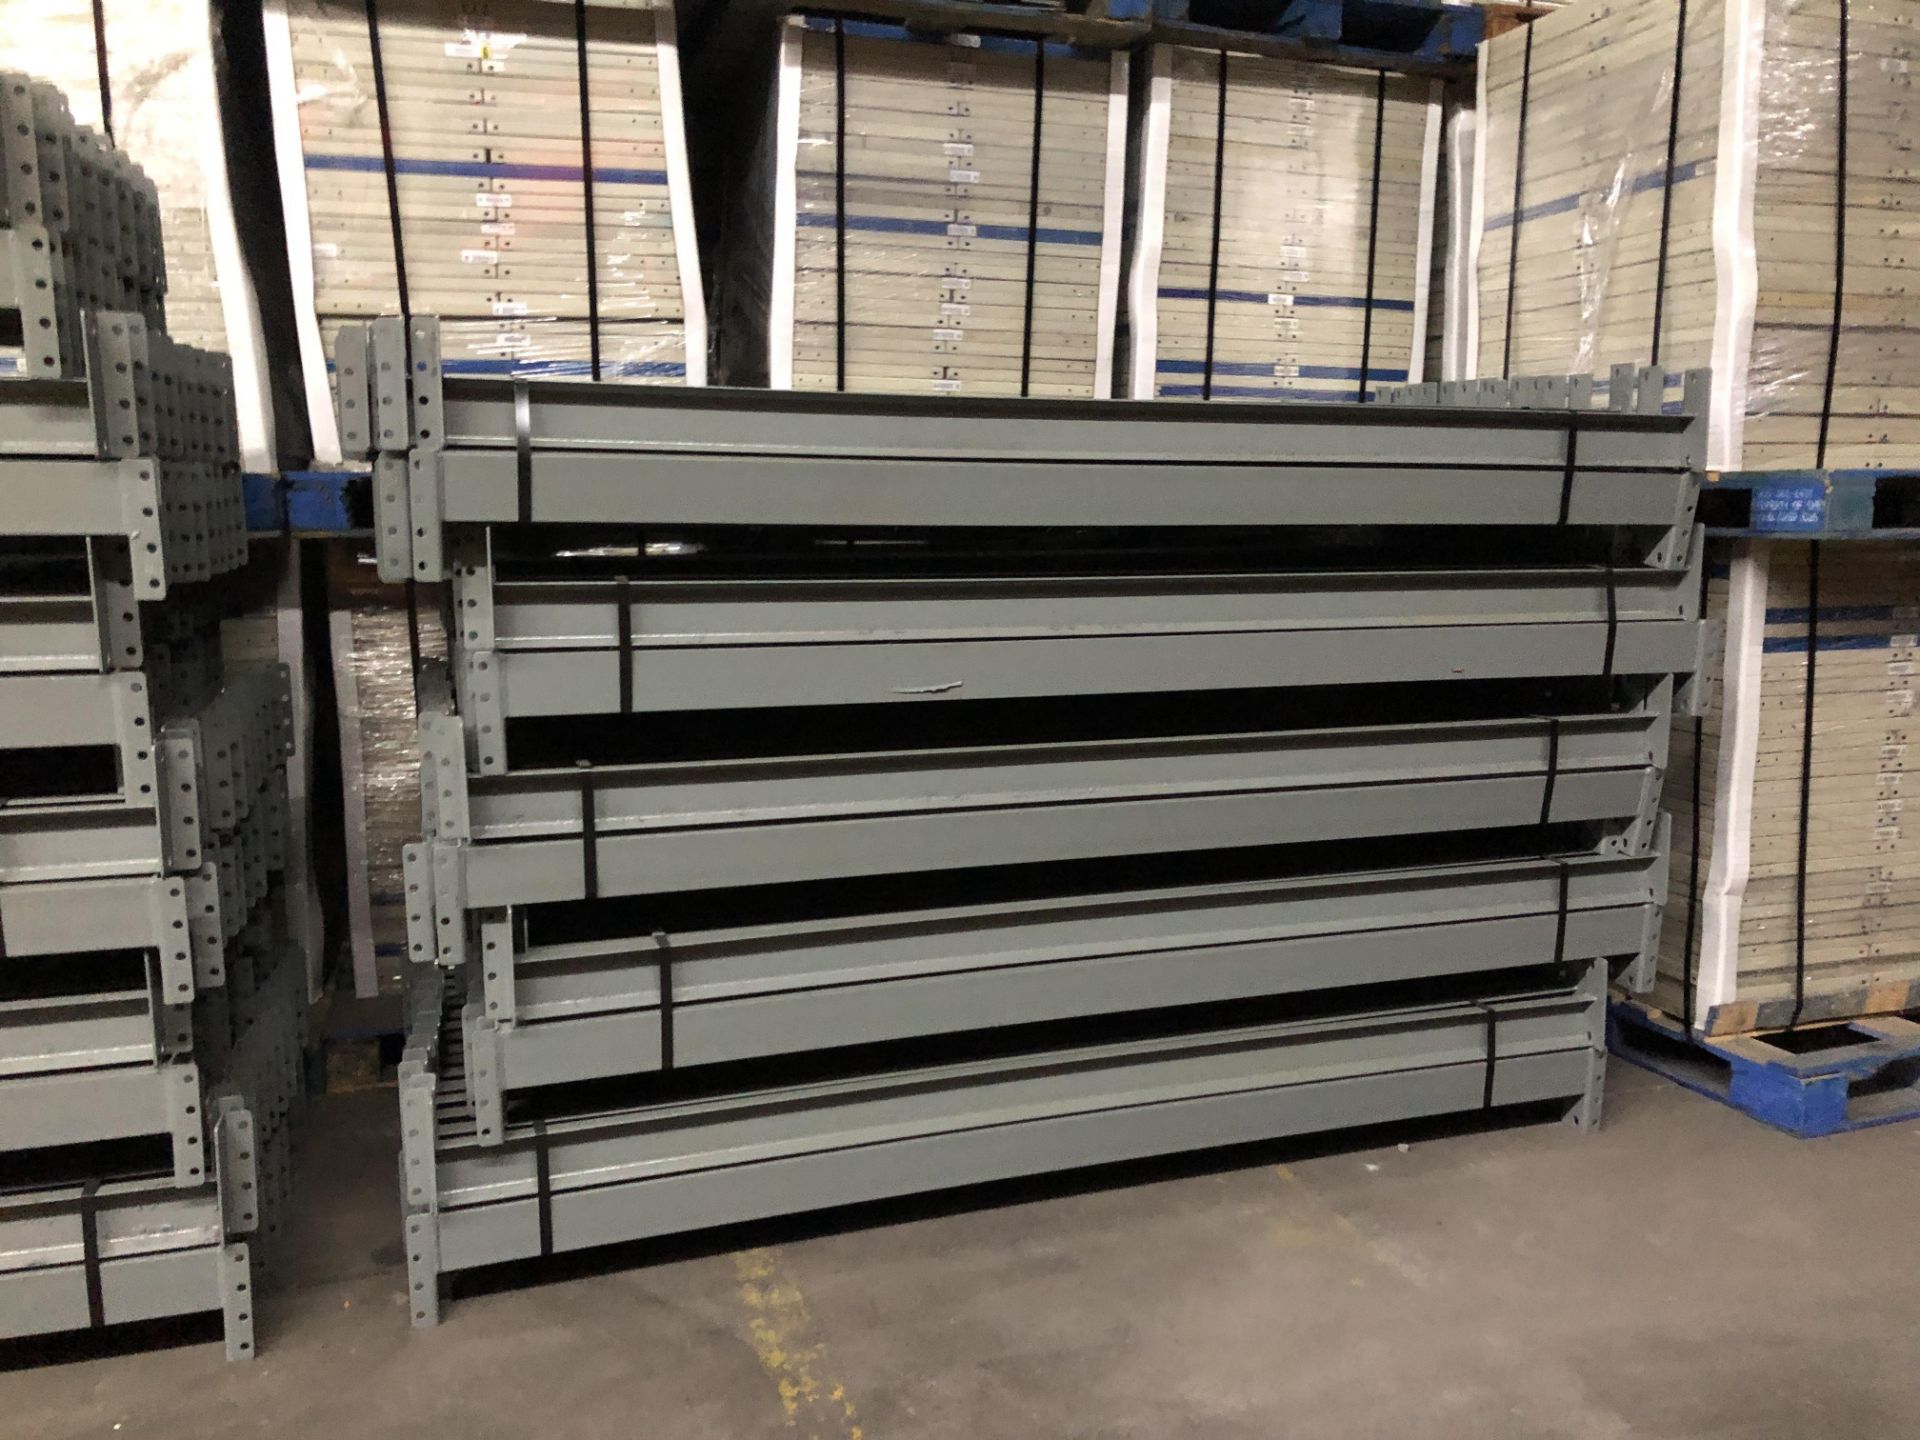 14 BAYS OF 10.5'H X 42"D X 93"L STRUCTURAL STYLE PALLET RACKS - Image 4 of 6